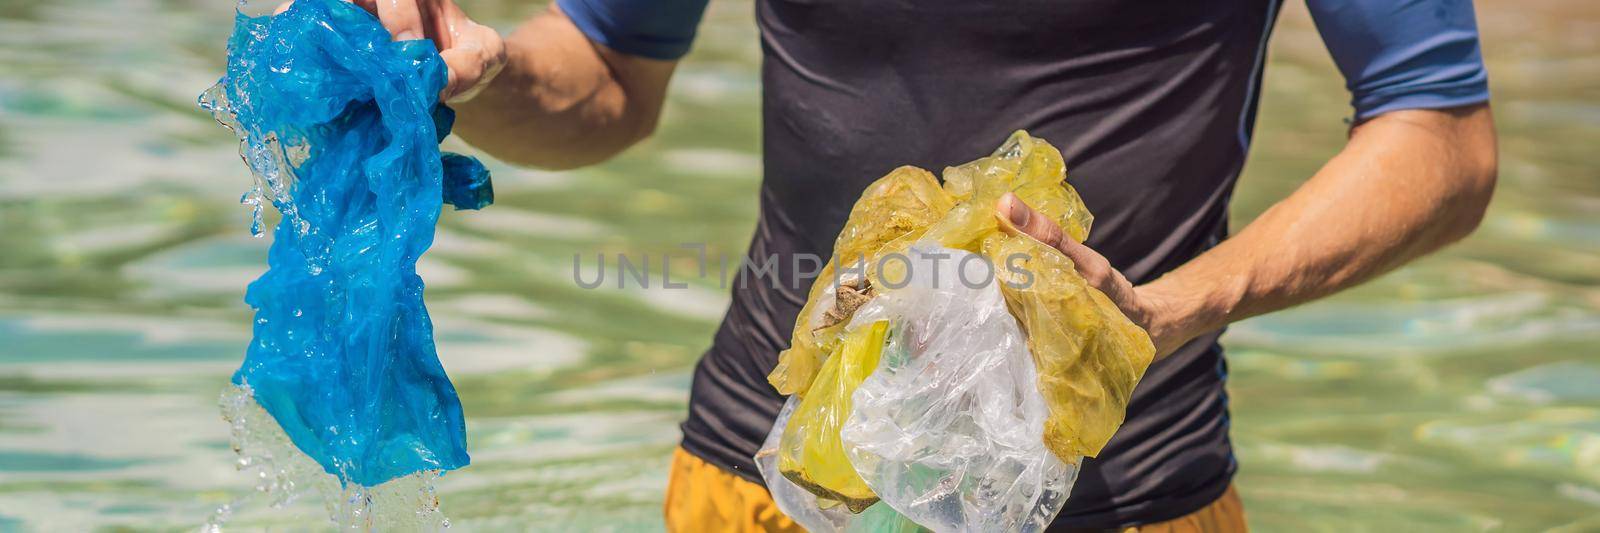 Man collects packages from the beautiful turquoise sea. Paradise beach pollution. Problem of spilled rubbish trash garbage on the beach sand caused by man-made pollution and environmental, campaign to clean volunteer in concept. BANNER, LONG FORMAT